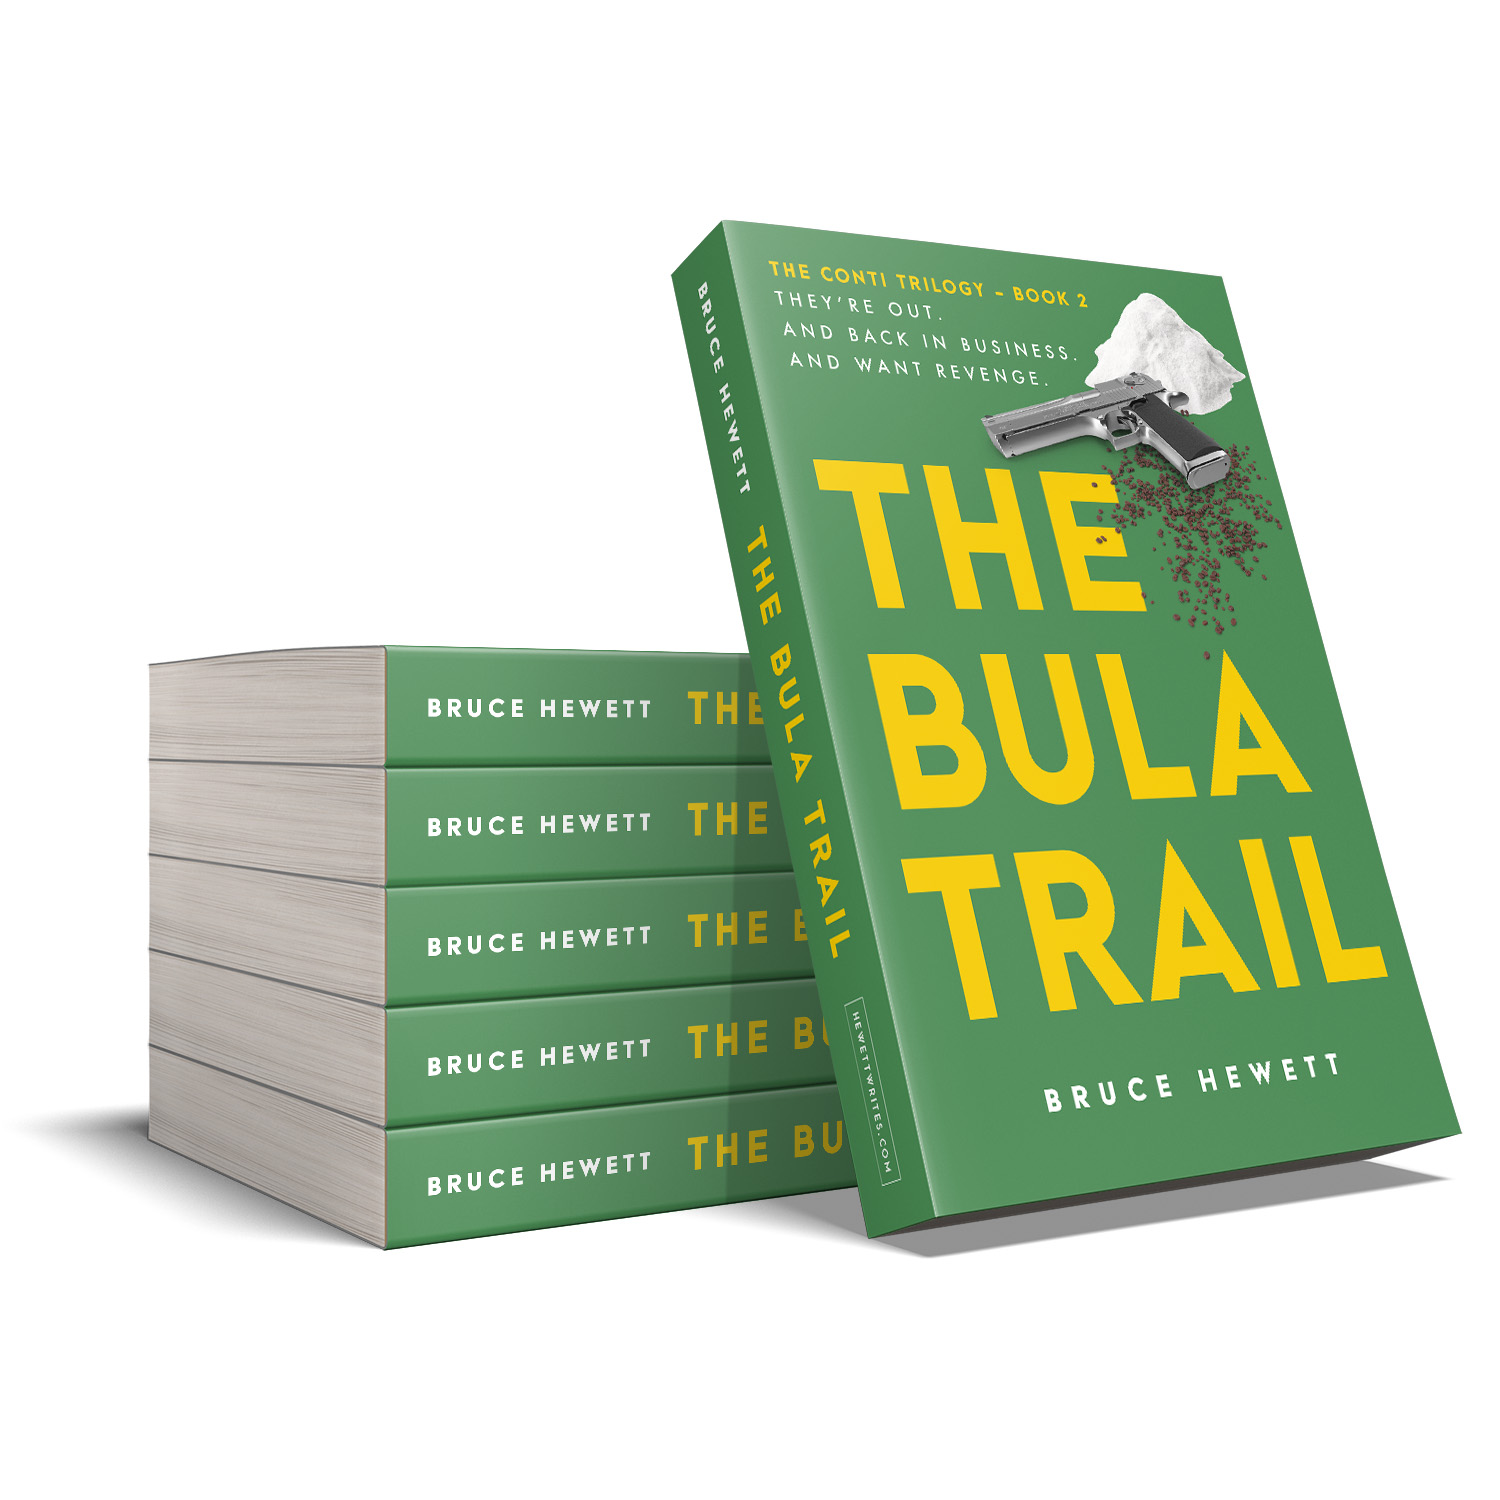 'The Bula Trail' is the second in an Australia-set, pharma-crime thriller series. The author is Bruce Hewett. The book cover and interior formatting are designed by Mark Thomas of coverness.com. To find out more about my book design services, please visit www.coverness.com